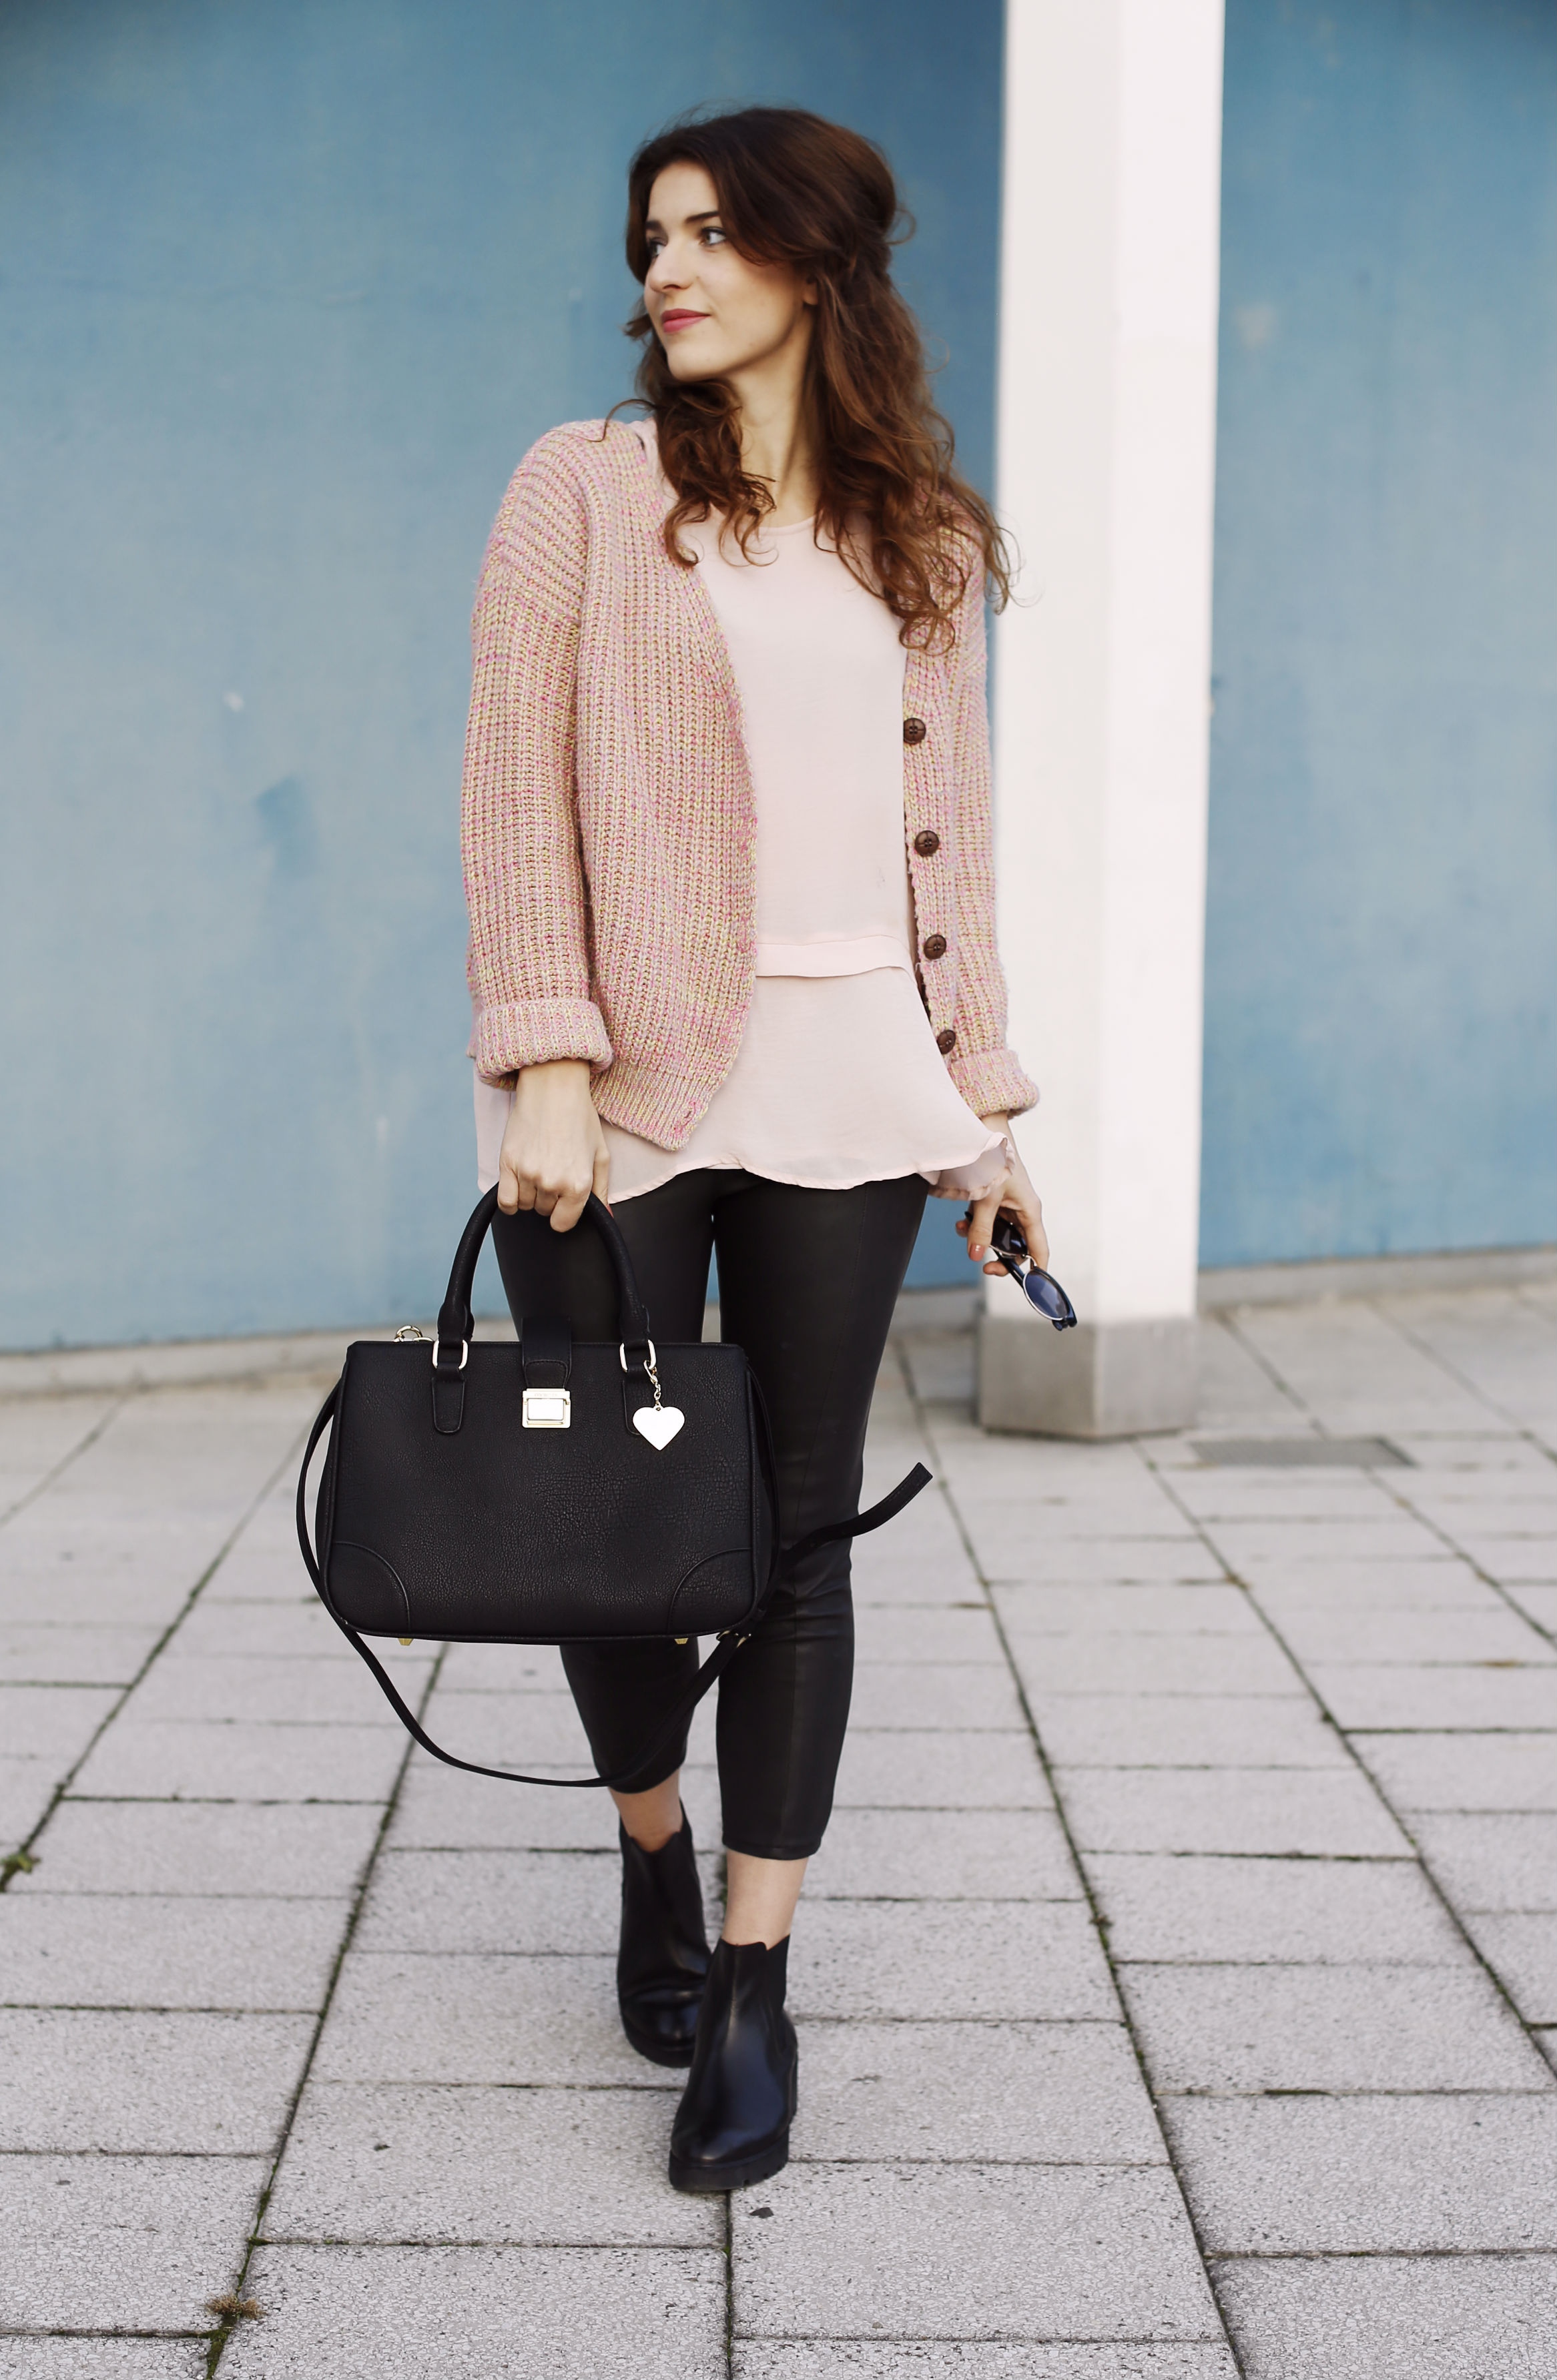 leather leggings_h&m chiffon pastel soft pink asos oversize knitted cardigan chunky boots plateau heels 90ies fashion boxy bag 